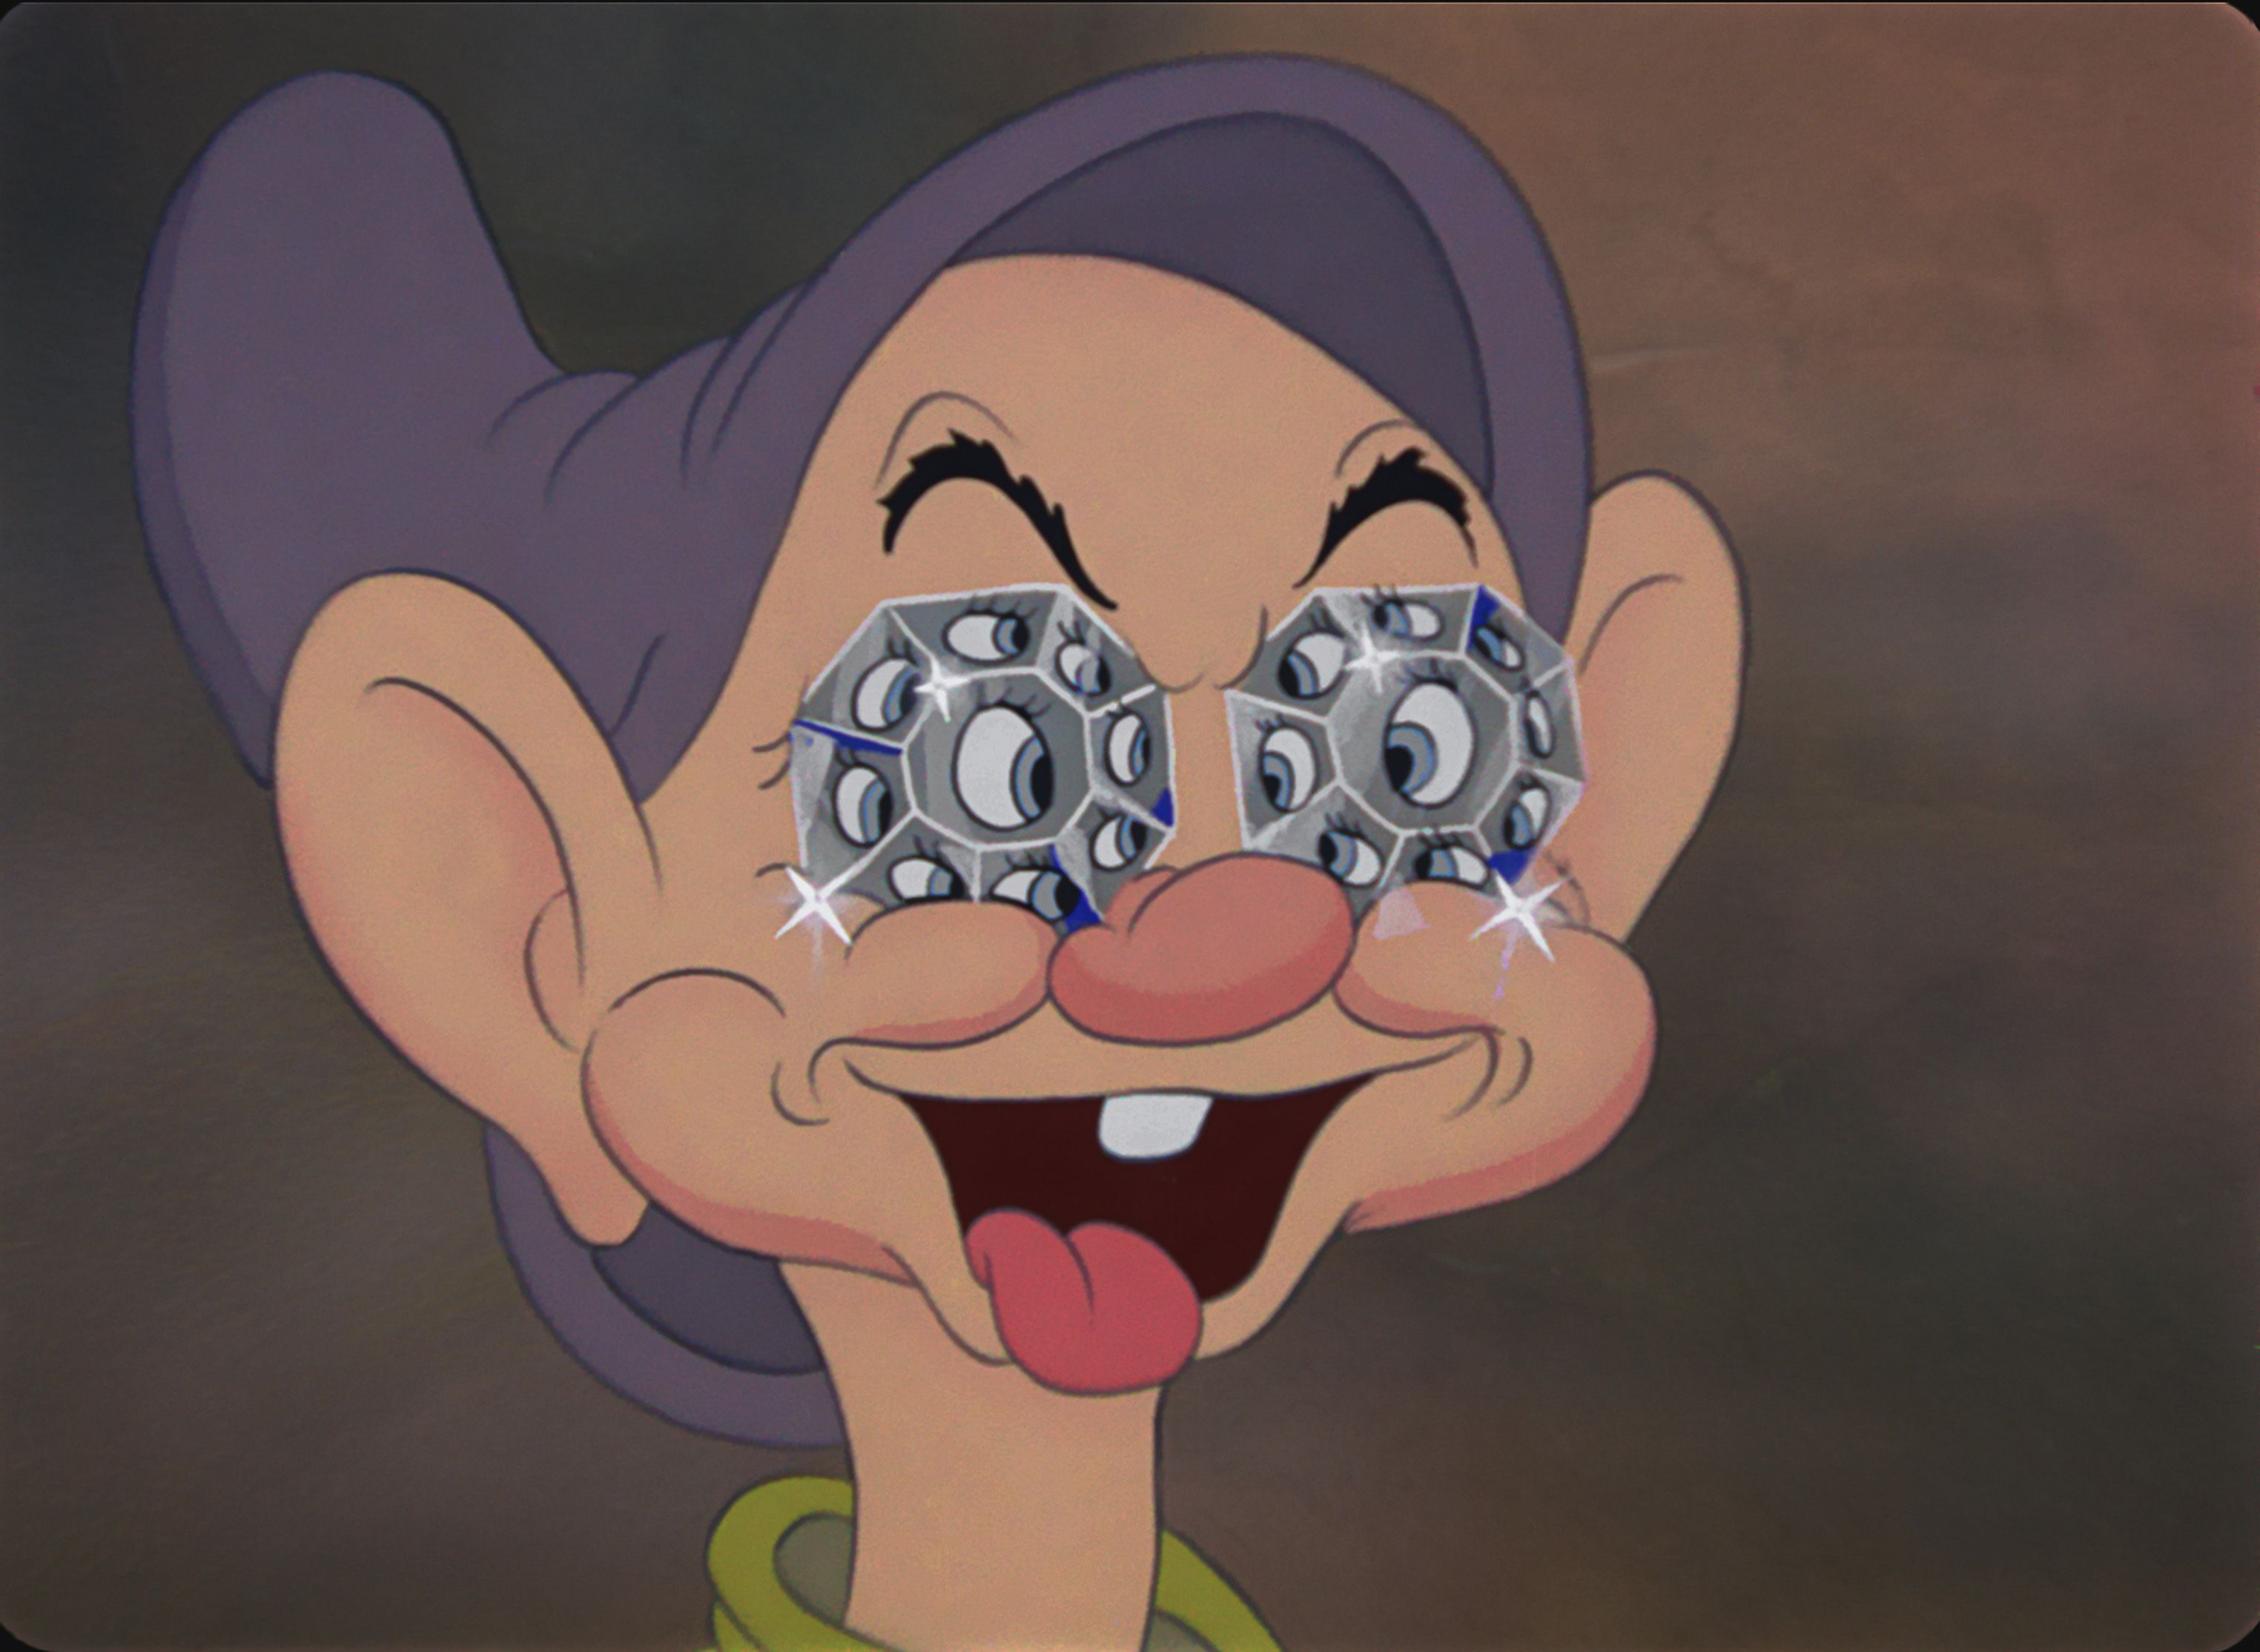 We're Dopey for diamonds thanks to Disneyland's Diamond Celebration! Enter now for your chance to win a VIP experience. Disney movies, Seven dwarfs, Disney songs